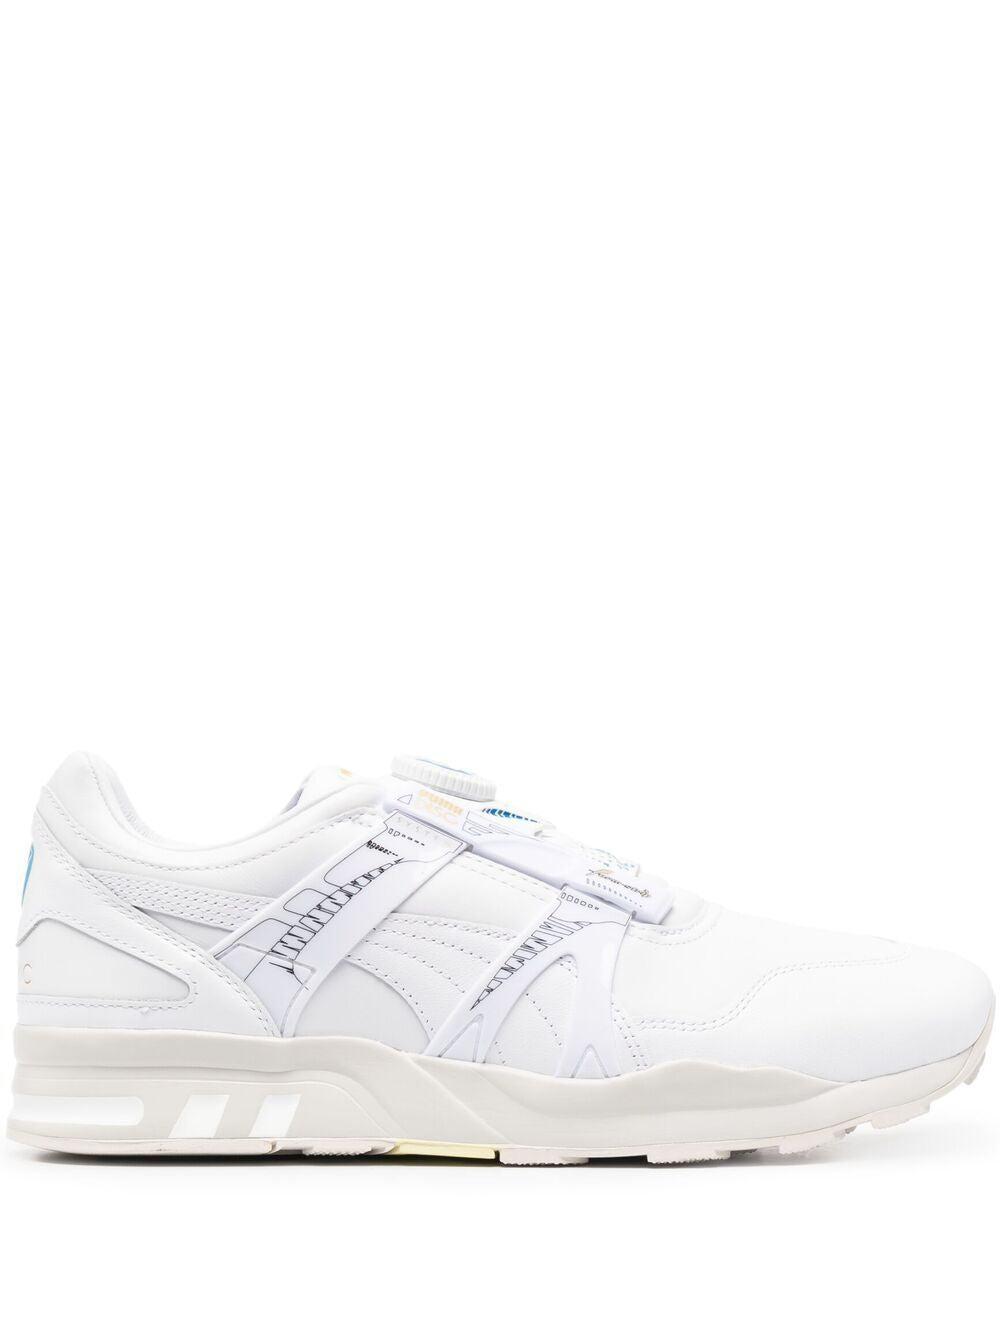 PUMA Xs 7000 Rudolf Dassler Legacy Trainers in White for Men - Save 60% |  Lyst